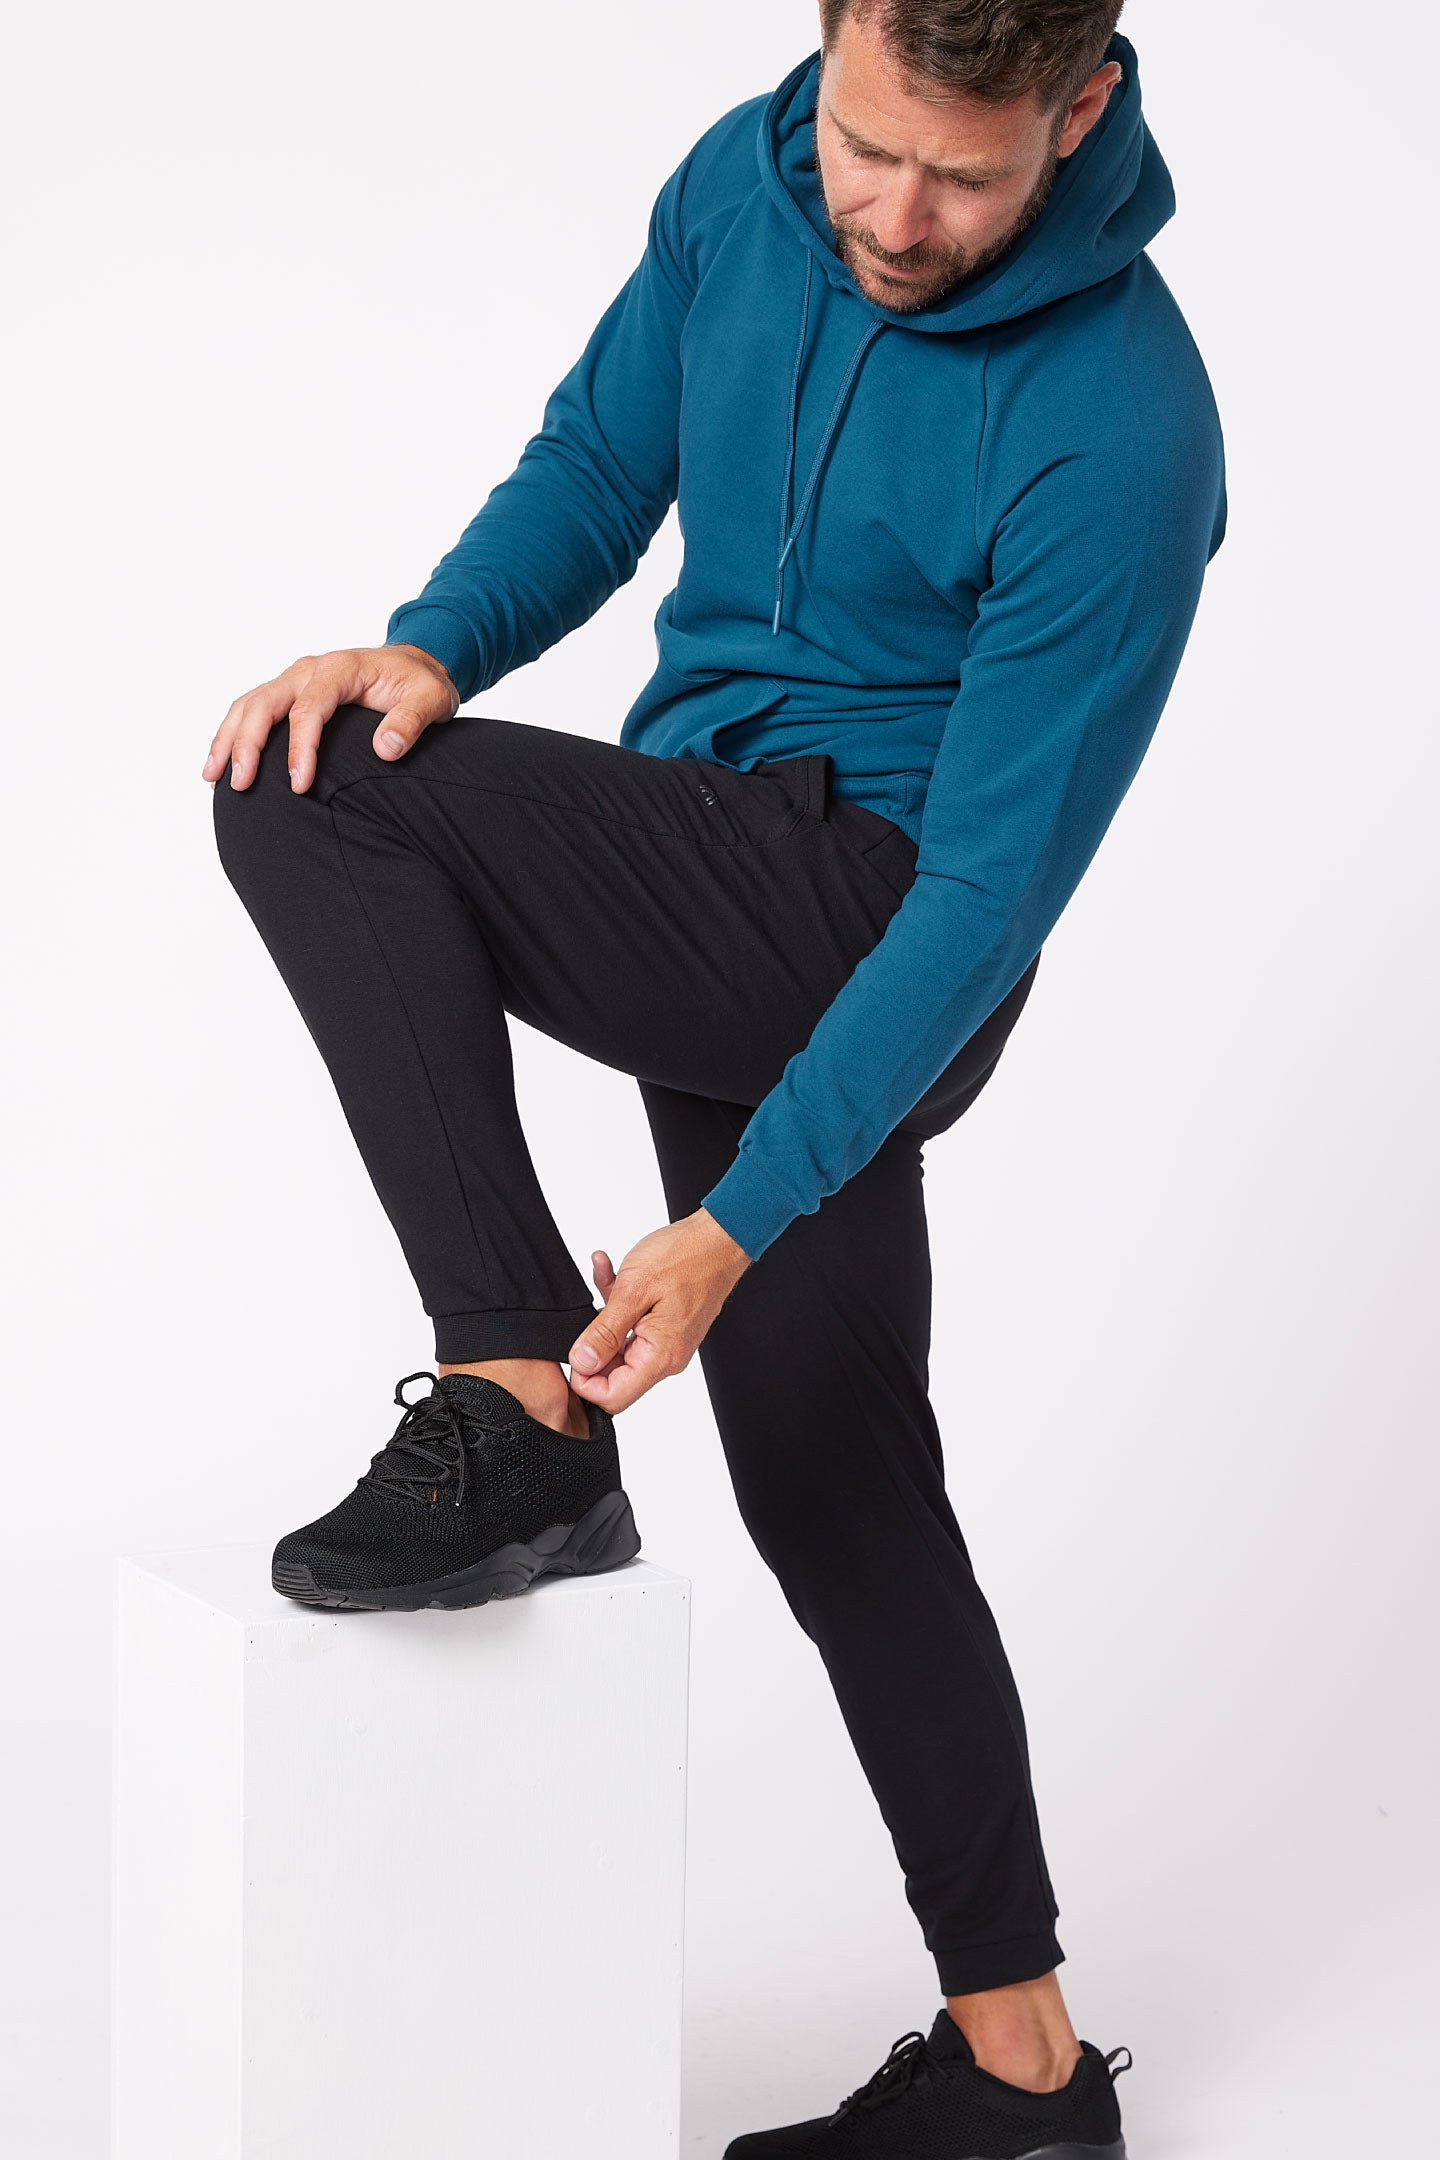 The Guide to Jogger Pants for Men Short Guys Edition